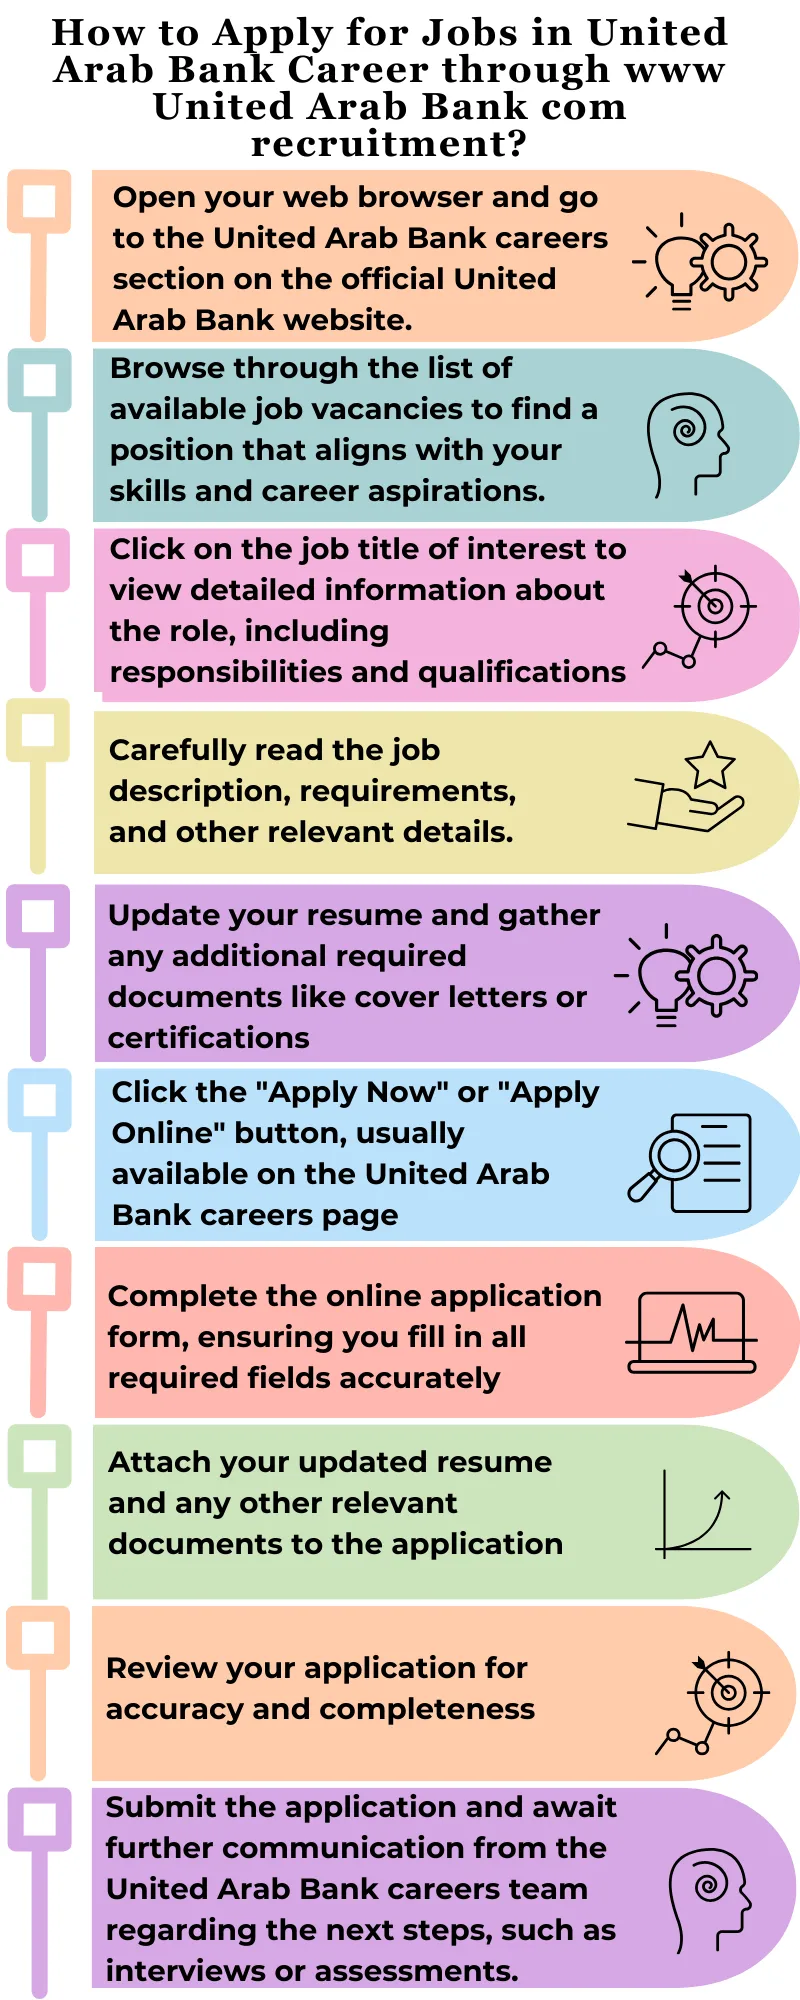 How to Apply for Jobs in United Arab Bank Career through www United Arab Bank com recruitment